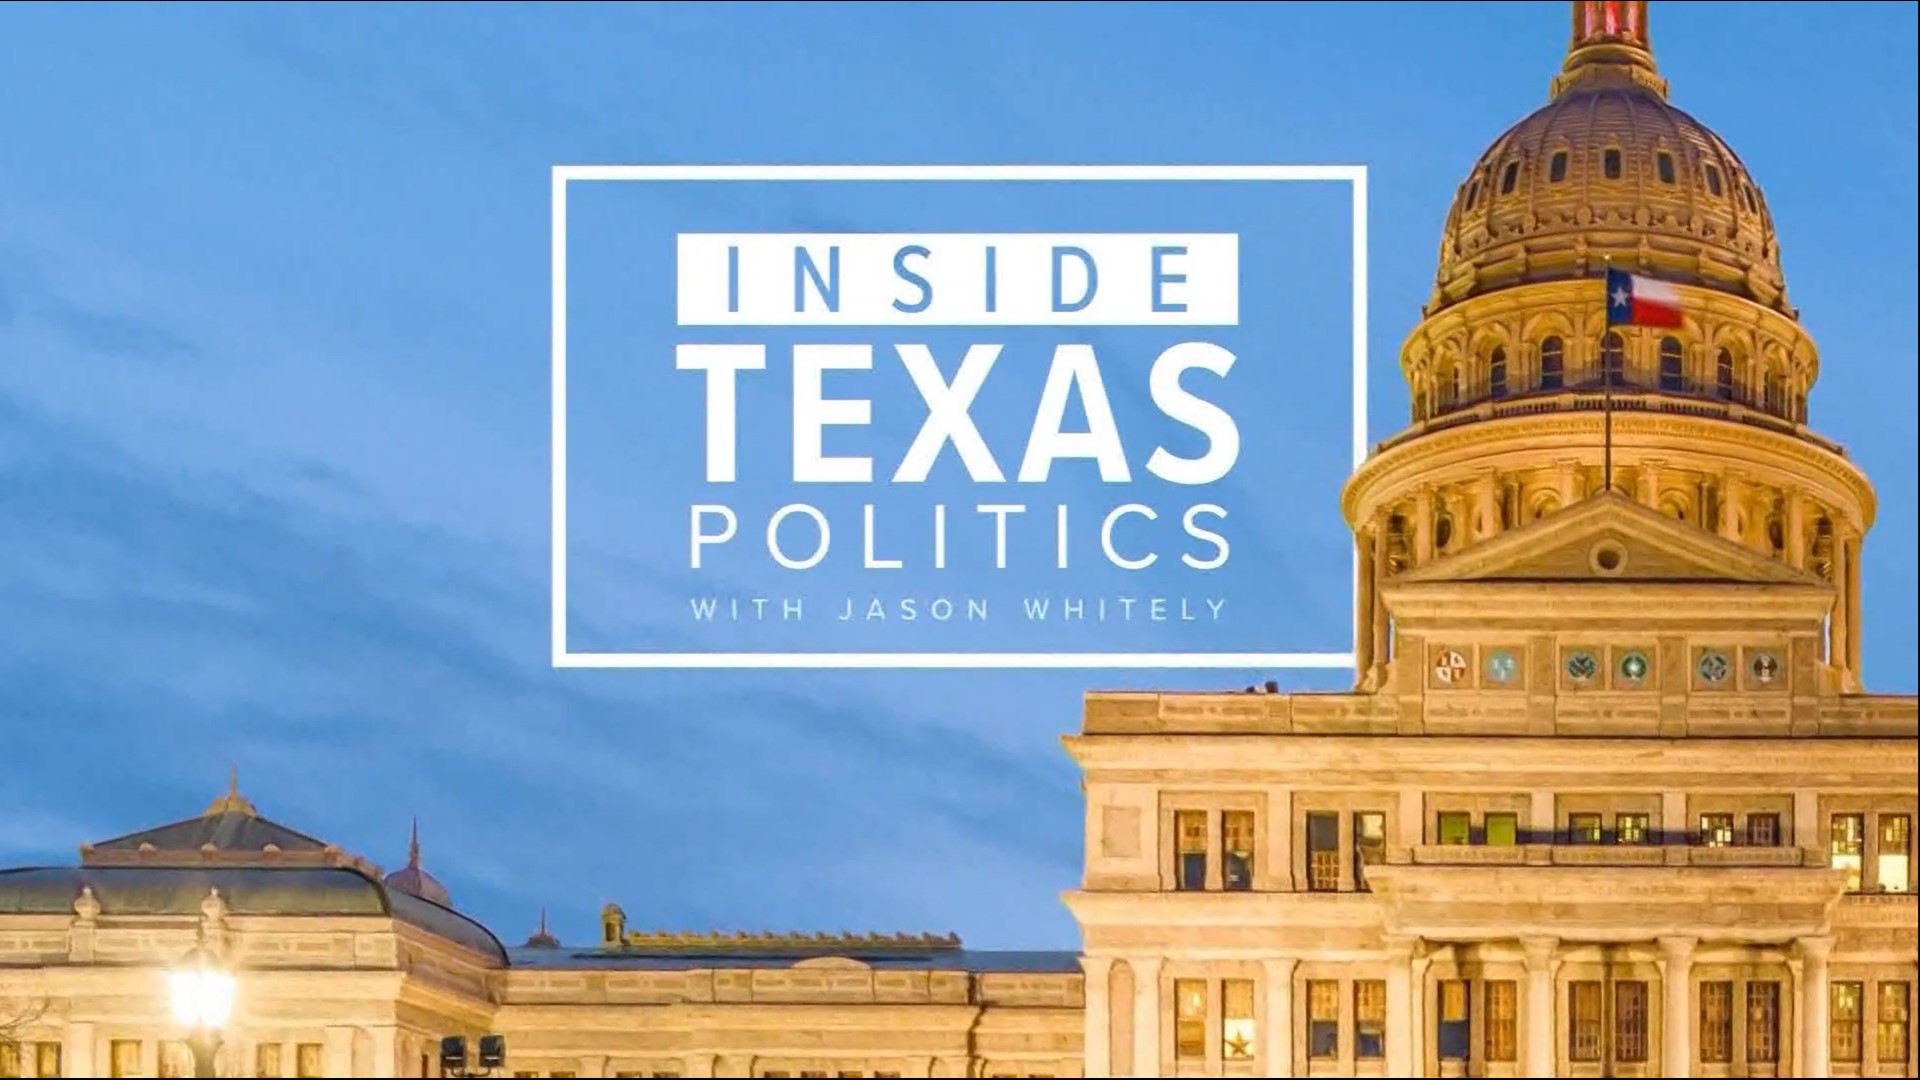 What's to blame for the divide in property tax relief plans among the state's top leaders? Plus: Could the "no" votes on school vouchers change in special session?